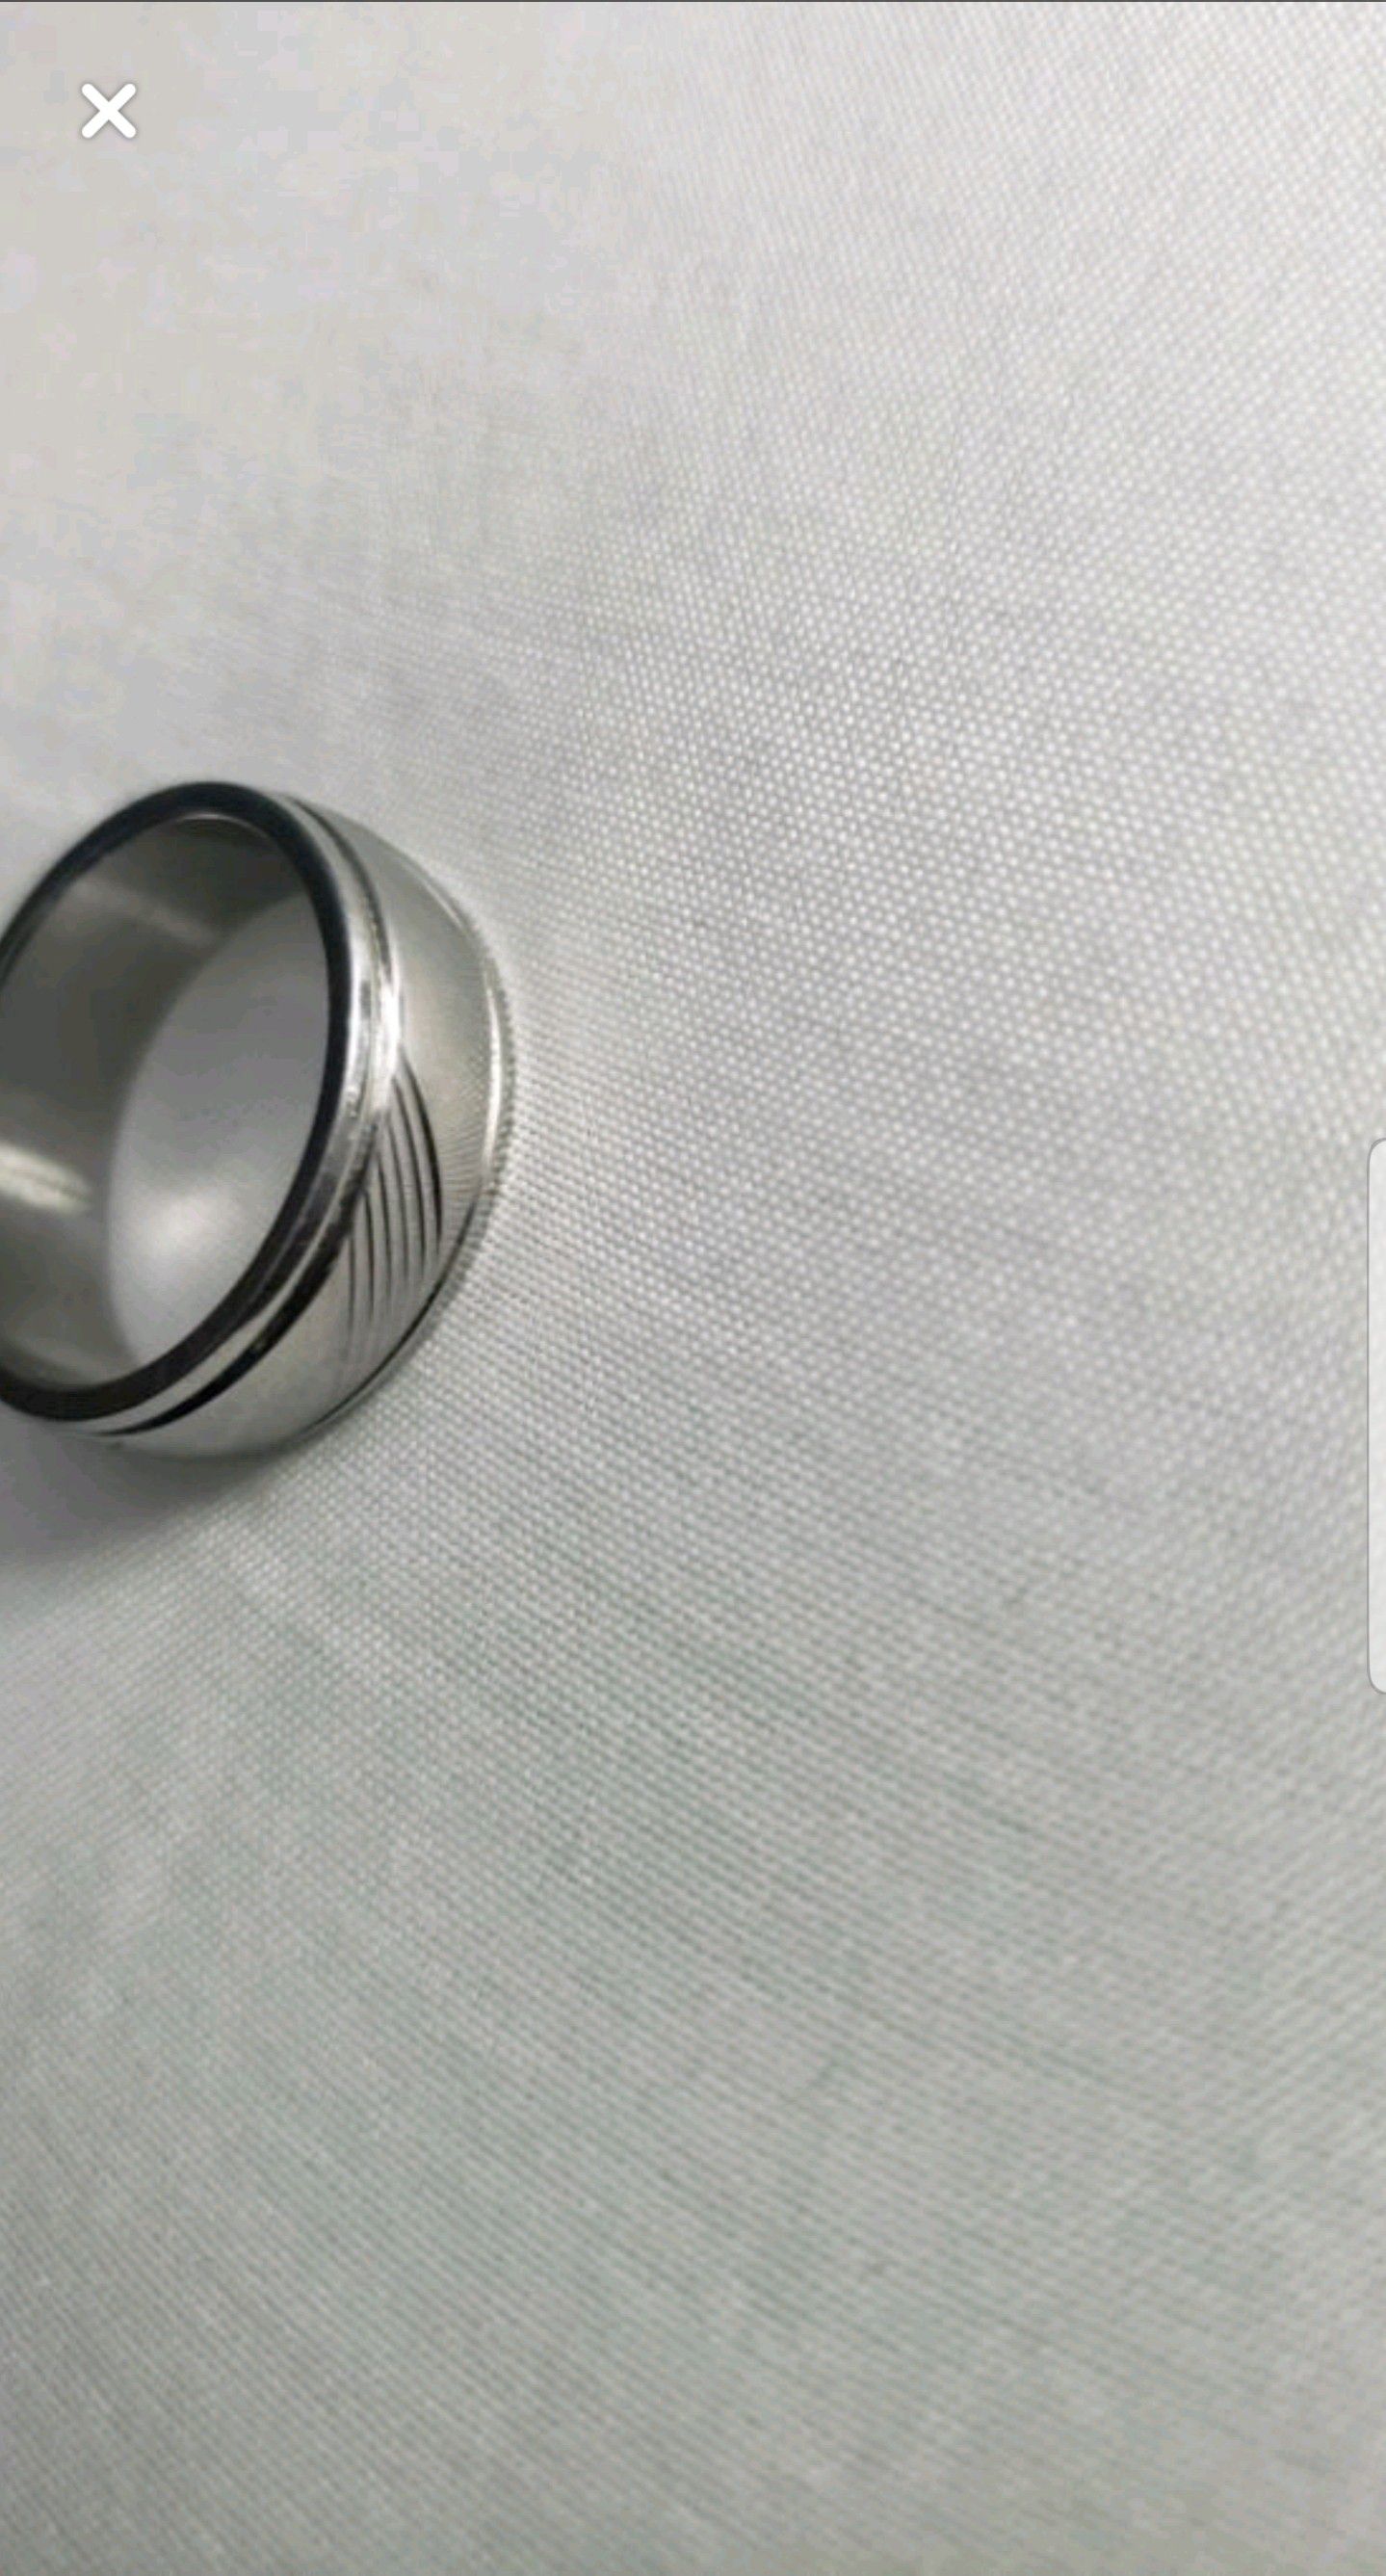 Stainless steel men's ring size 10